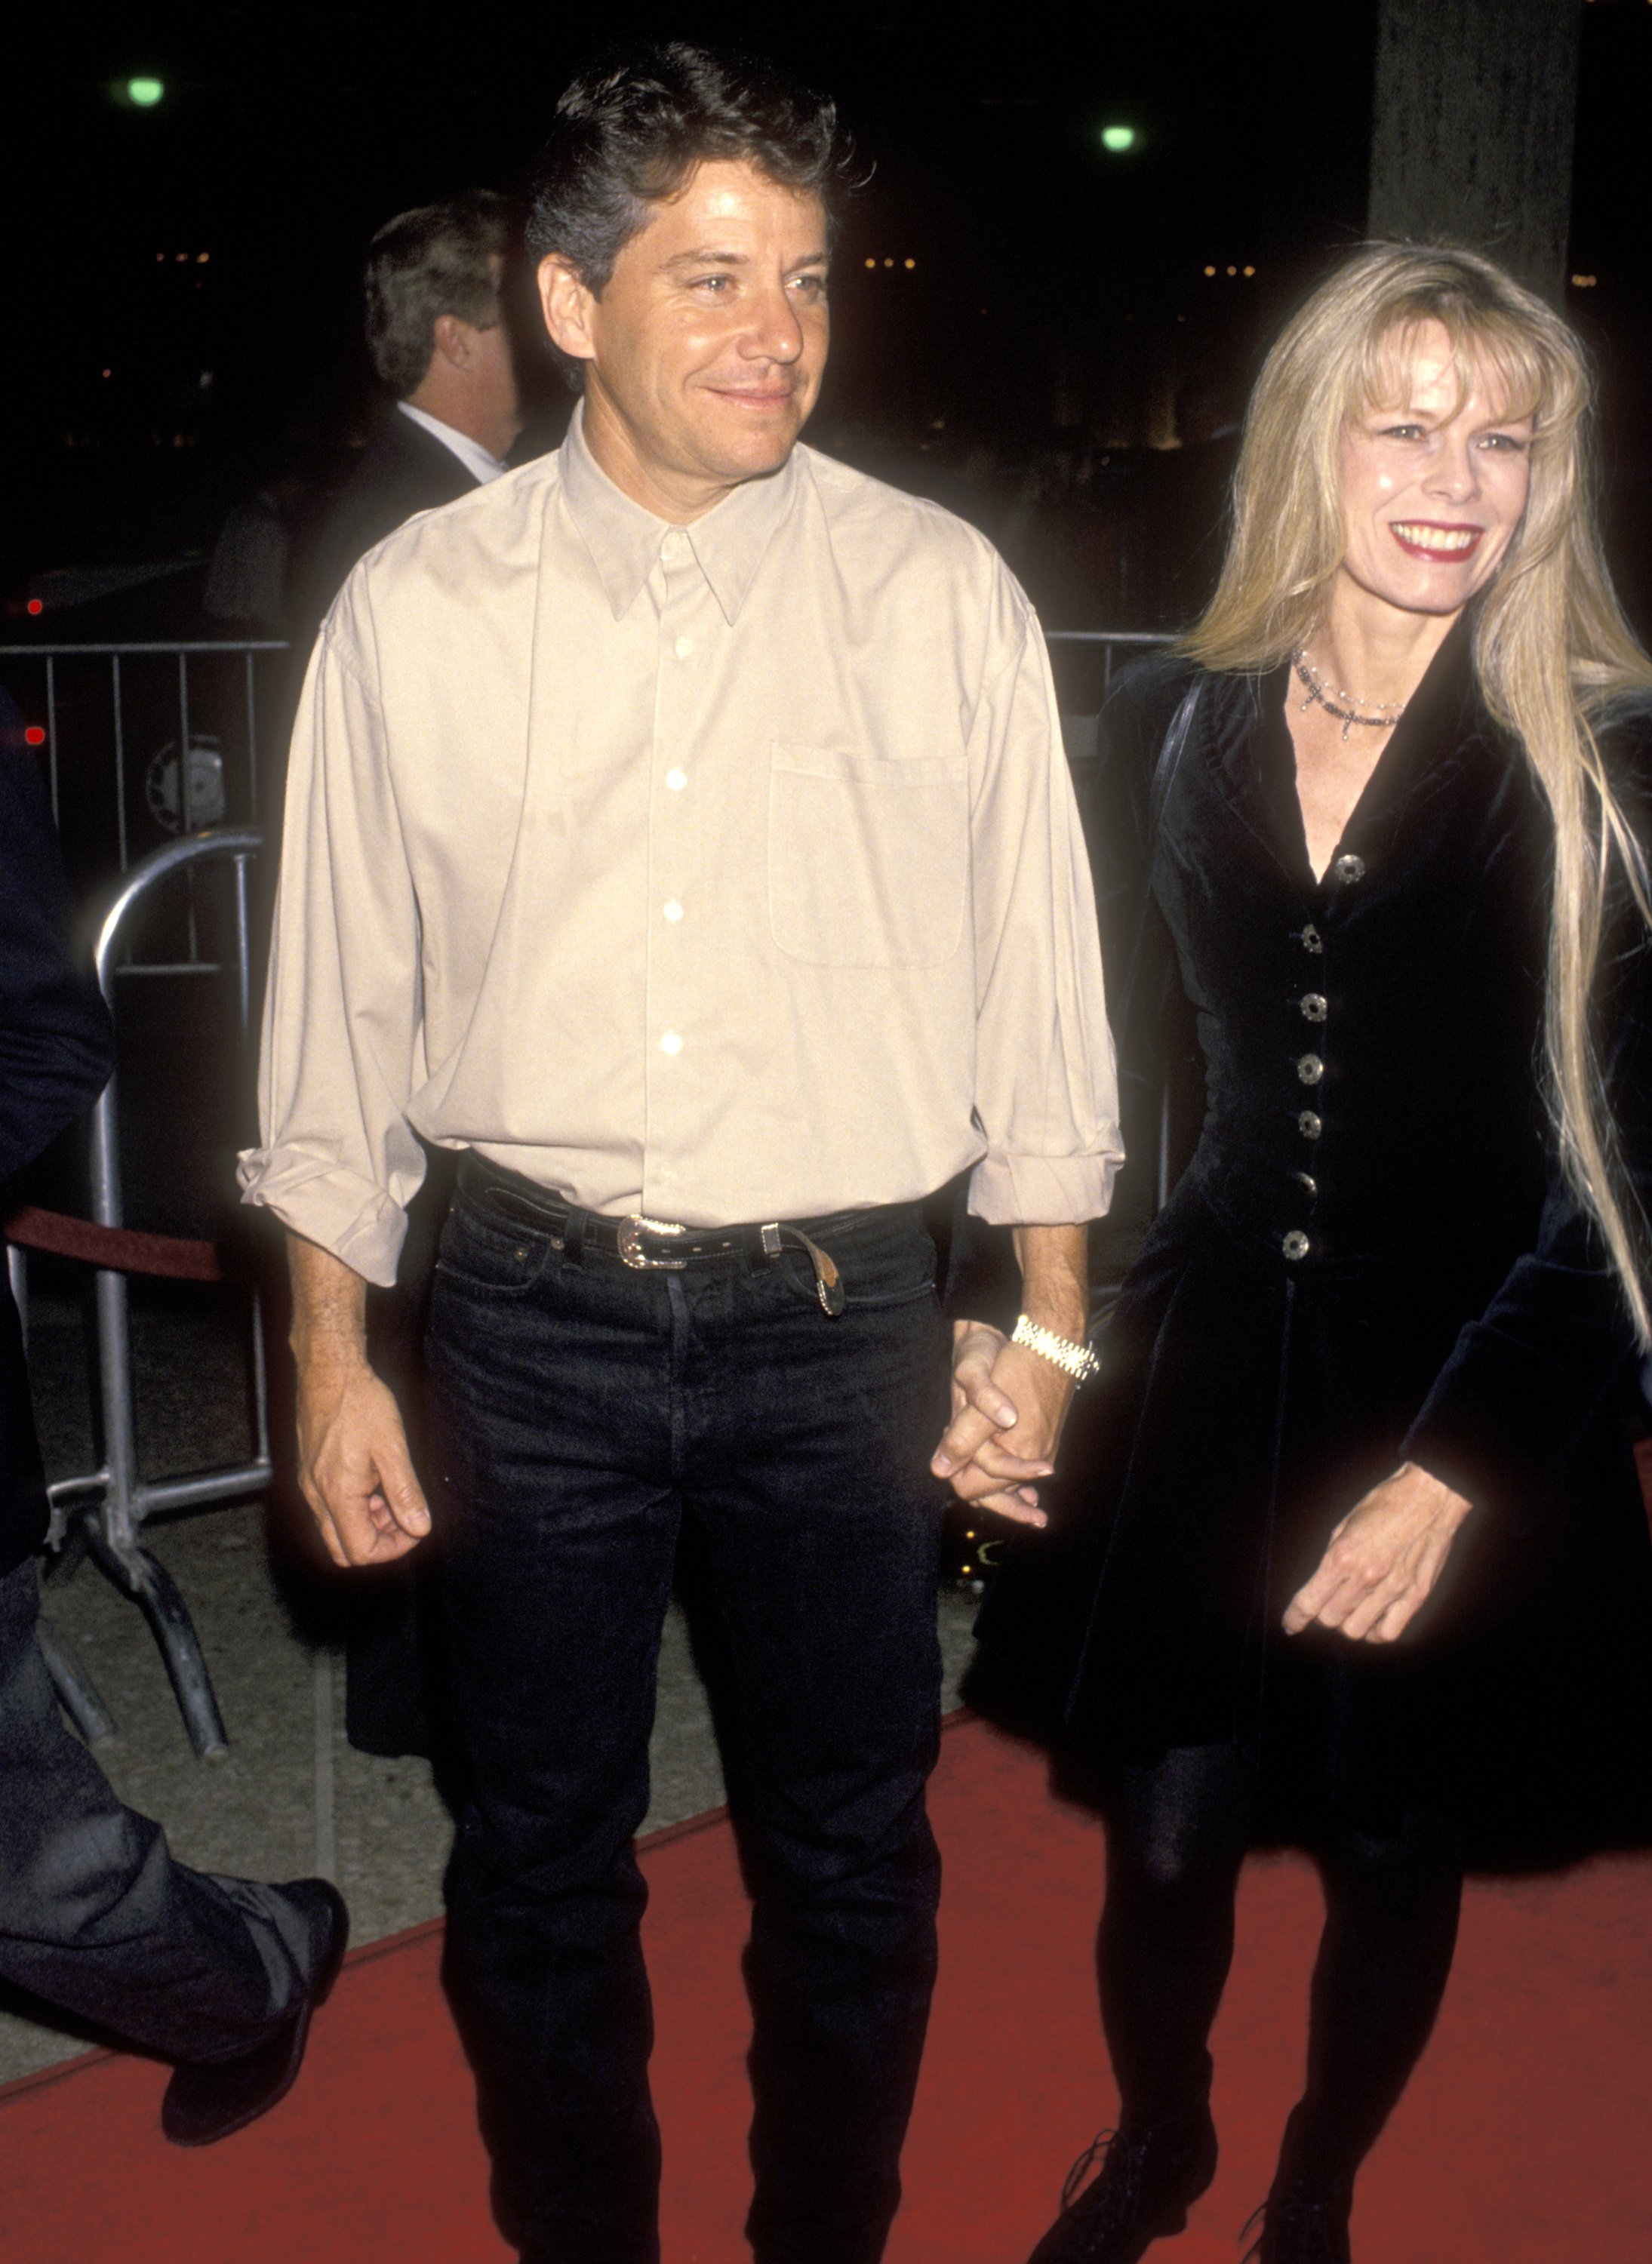 Anson Williams and Jackie Gerken attending the premiere of 'The Paper' on March 16, 1994 in California | Source: Getty Images